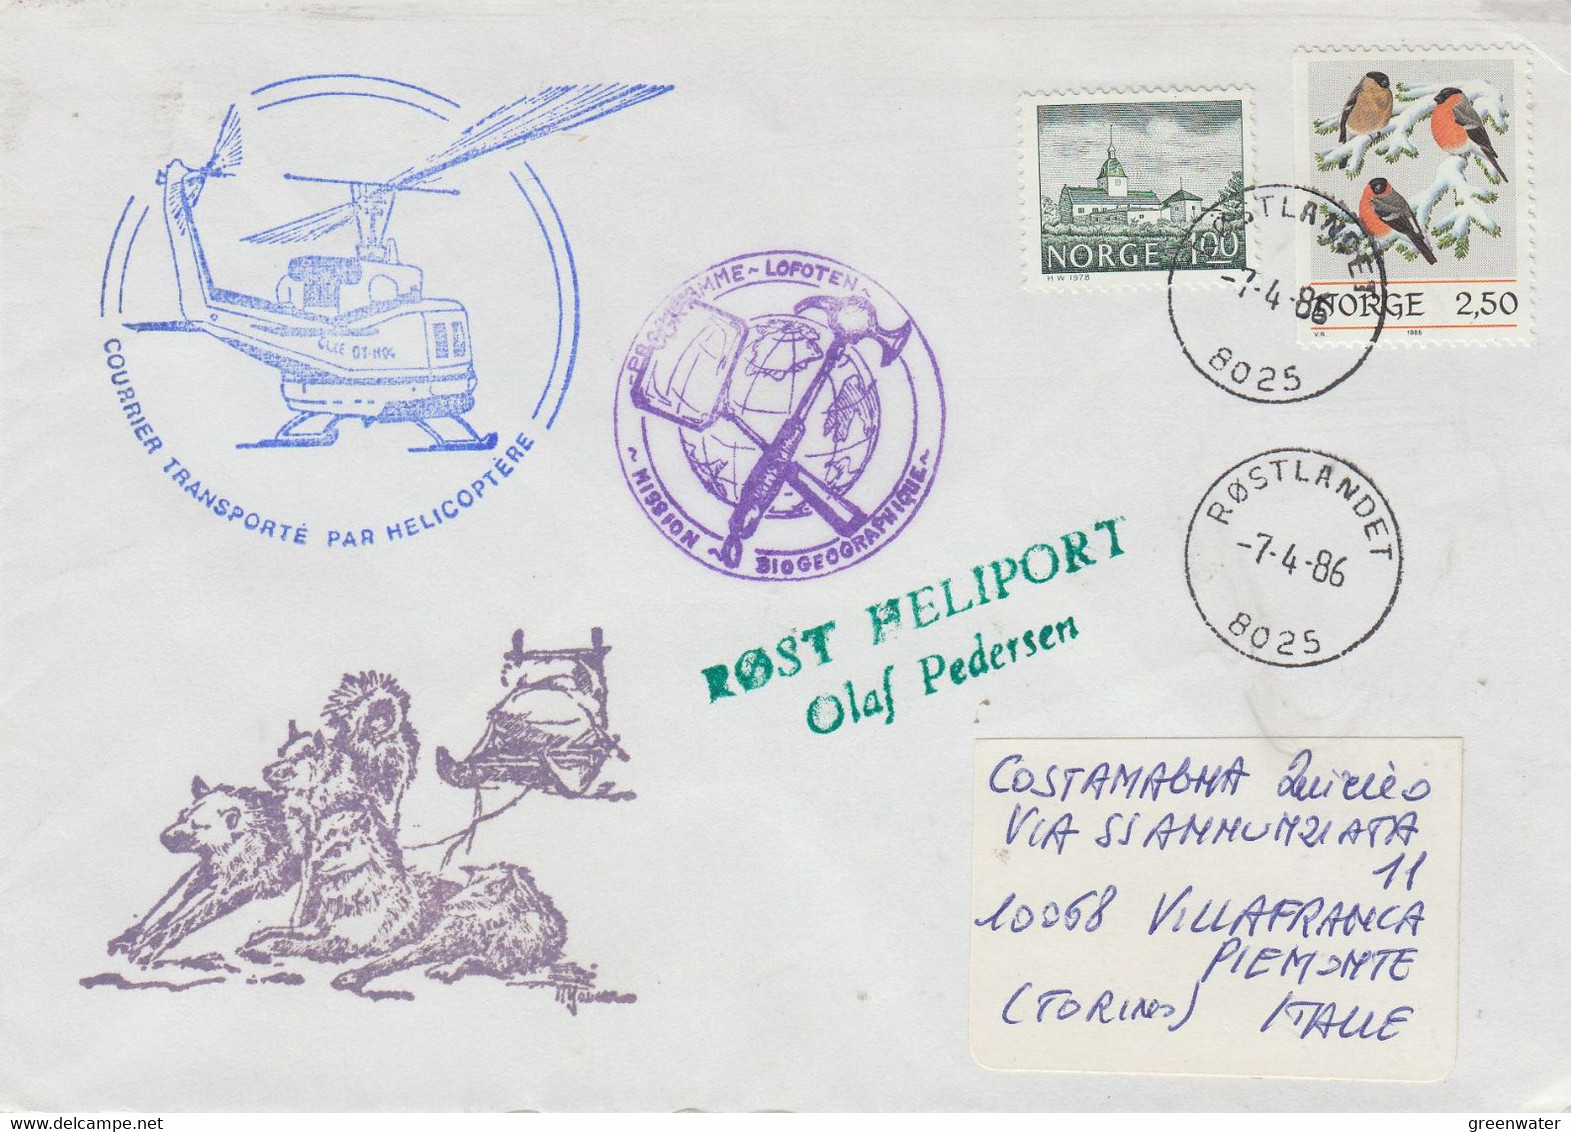 Norway 1986 Mission Geographique Rost Heliport Cover Ca Rostlandet 7-4-1986 (NW202) - Programmi Di Ricerca